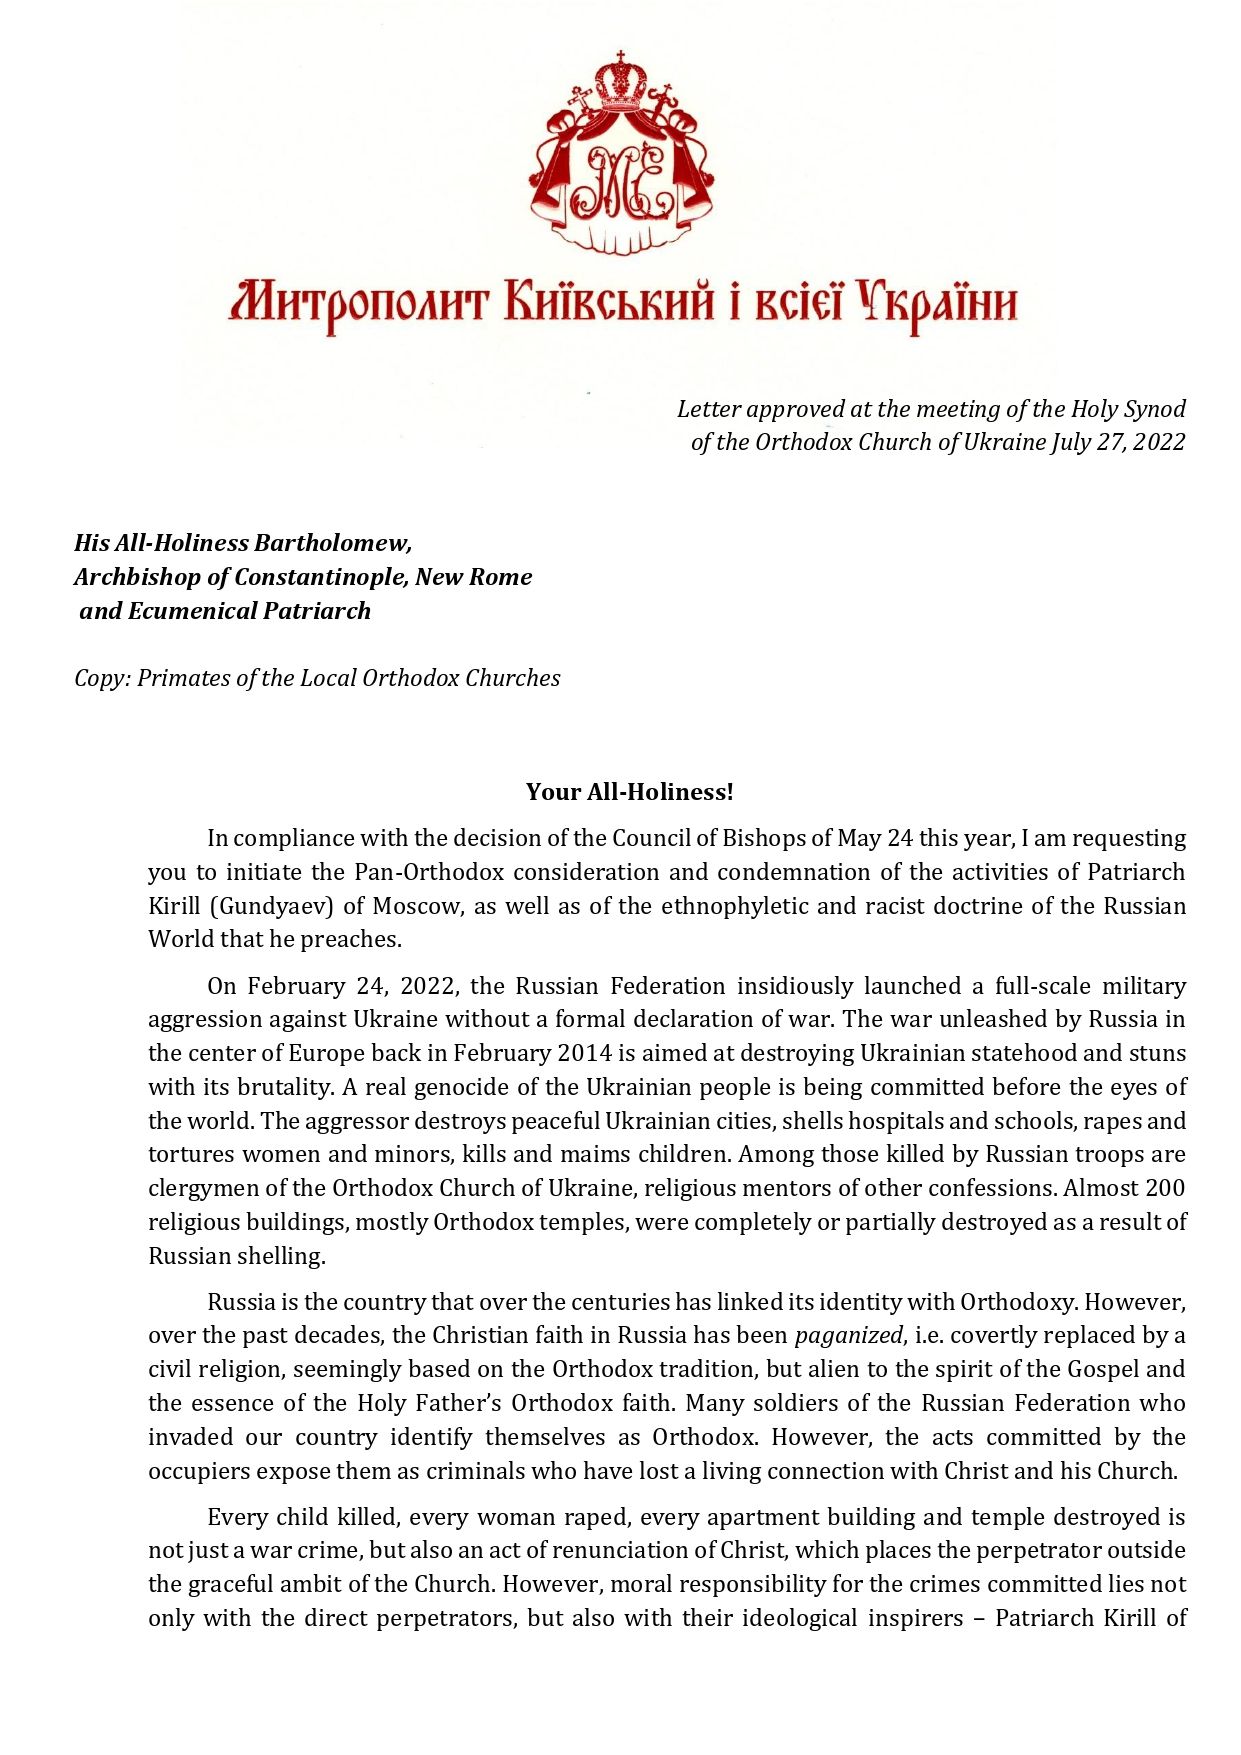 The head of the OCU asked the Ecumenical Patriarch to deprive the head of the Russian Orthodox Church, Kirill, of the Patriarchal throne - фото 98027